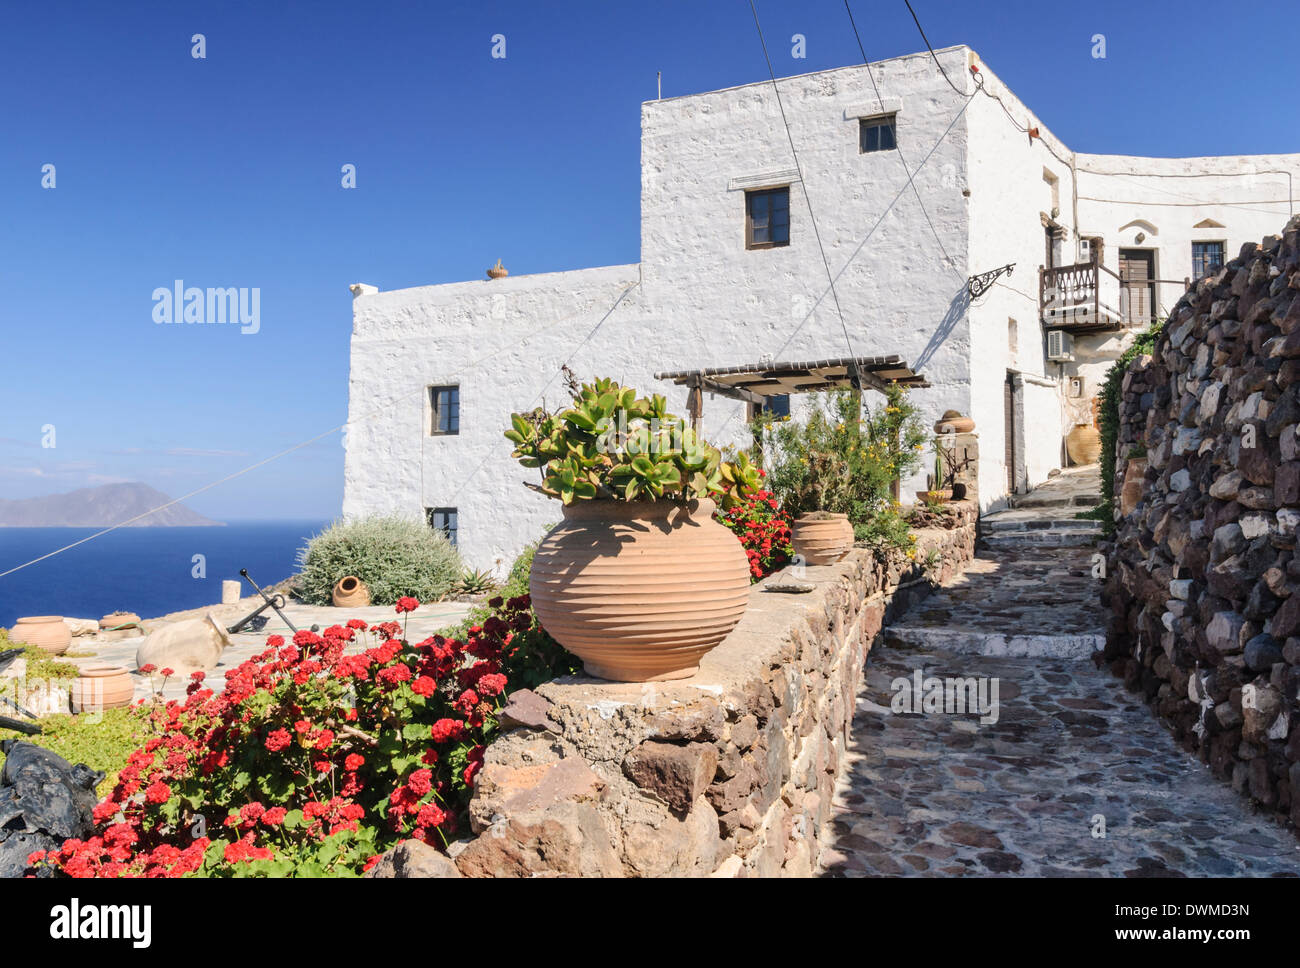 Stone path leading to a whitewashed house in the Plaka, Milos Island, Cyclades, Greece Stock Photo